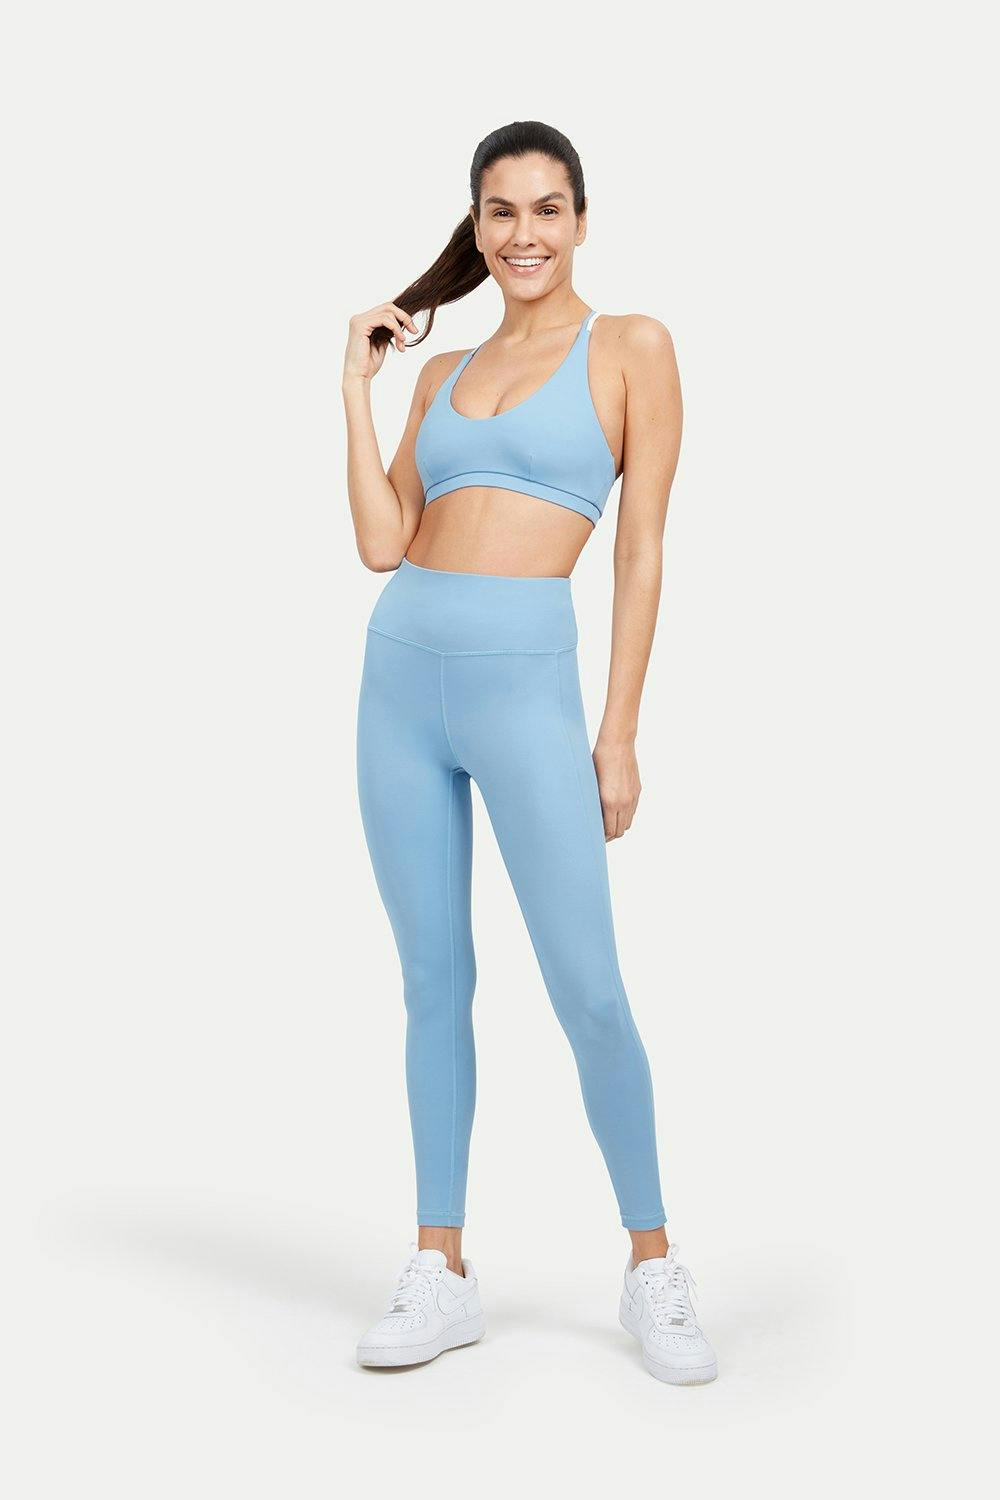 Best activewear matching sets for women in summer 2021